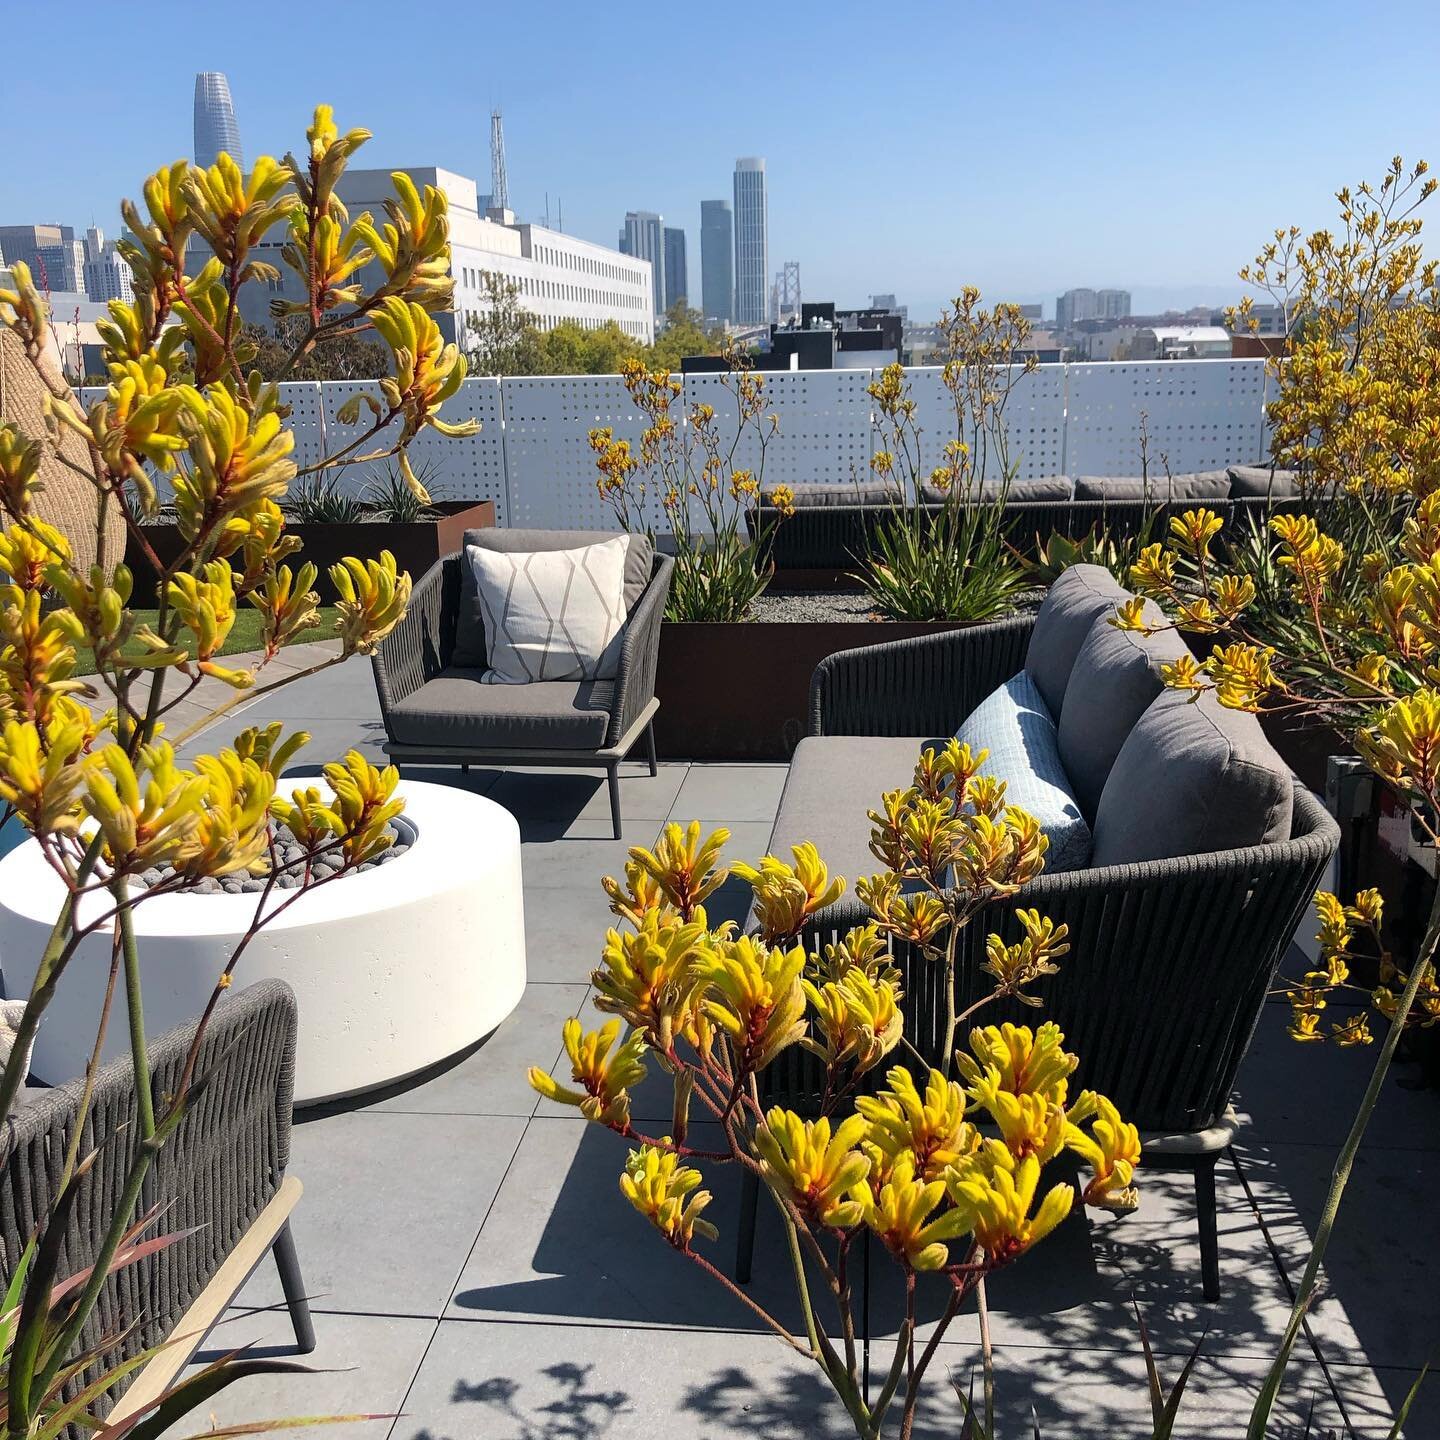 On the rooftop for Bryant Housing, we created pockets of respite to create cozy comfort while also having stunning views of a big city.

#luxuryapartment #soma #sf #rooftopgarden